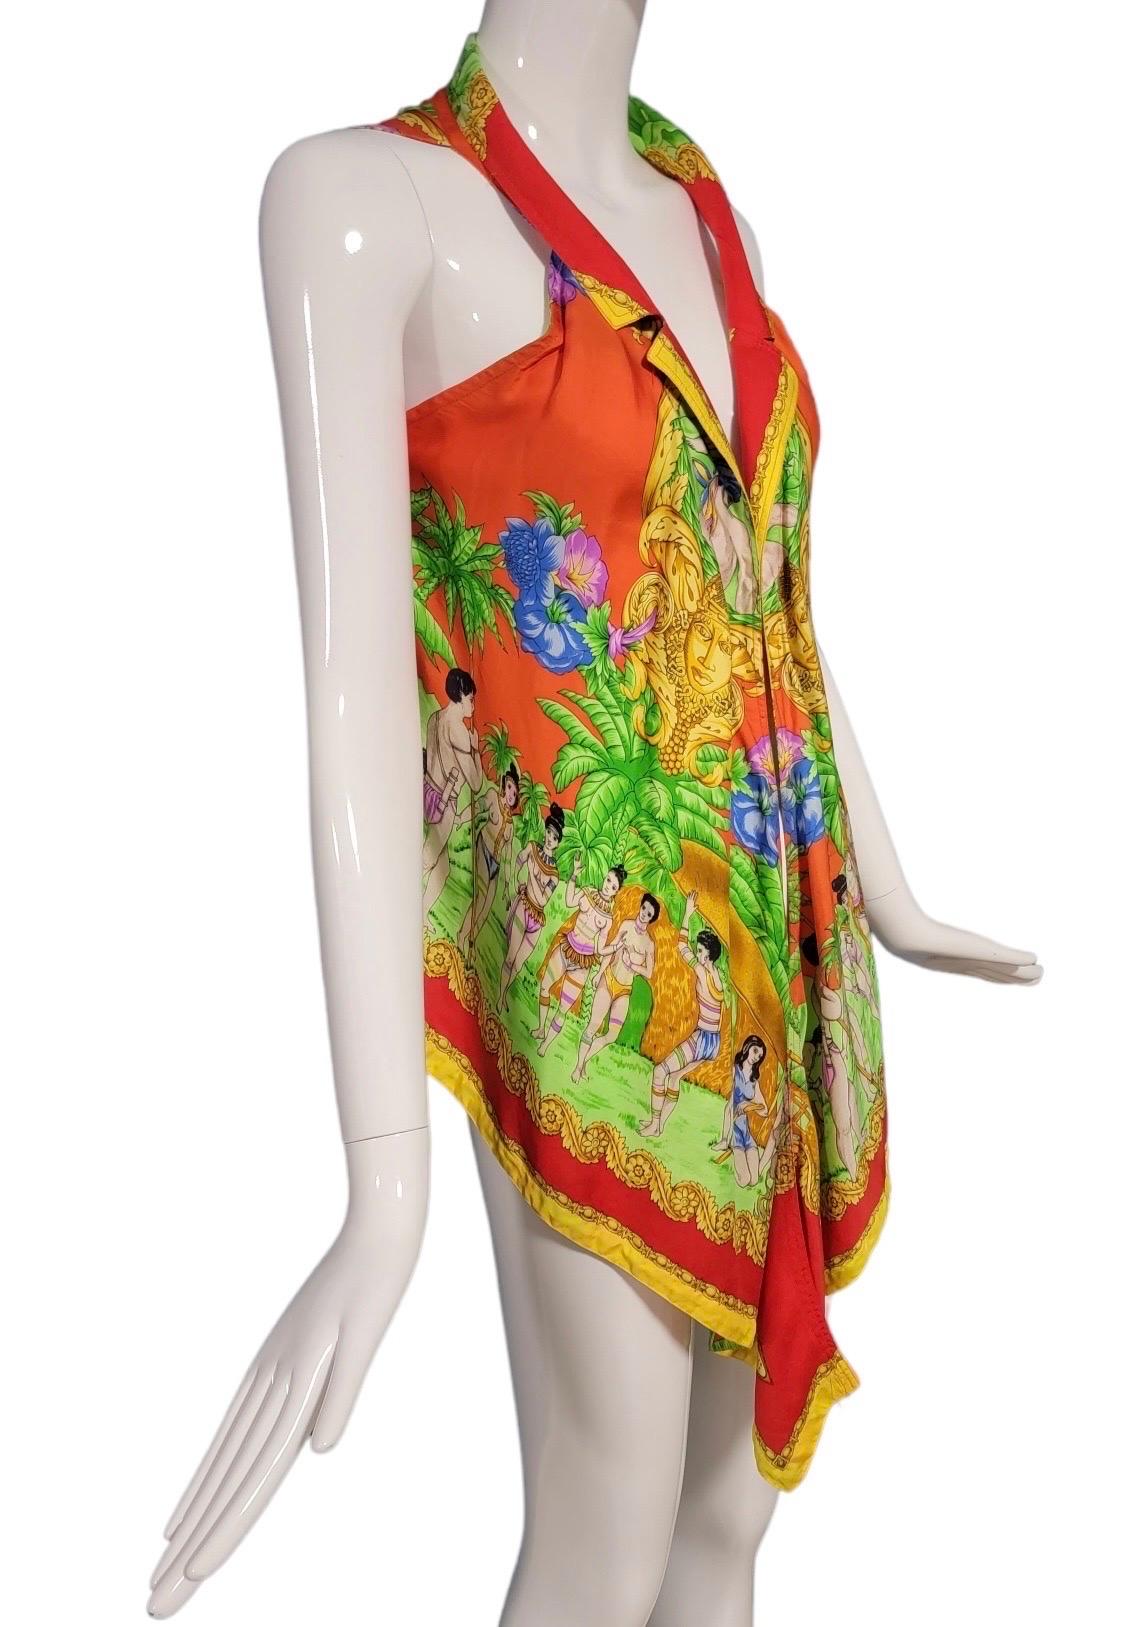 Gianni Versace Paradise Lost print Cropped Top Silk Shirt SS 1993 2